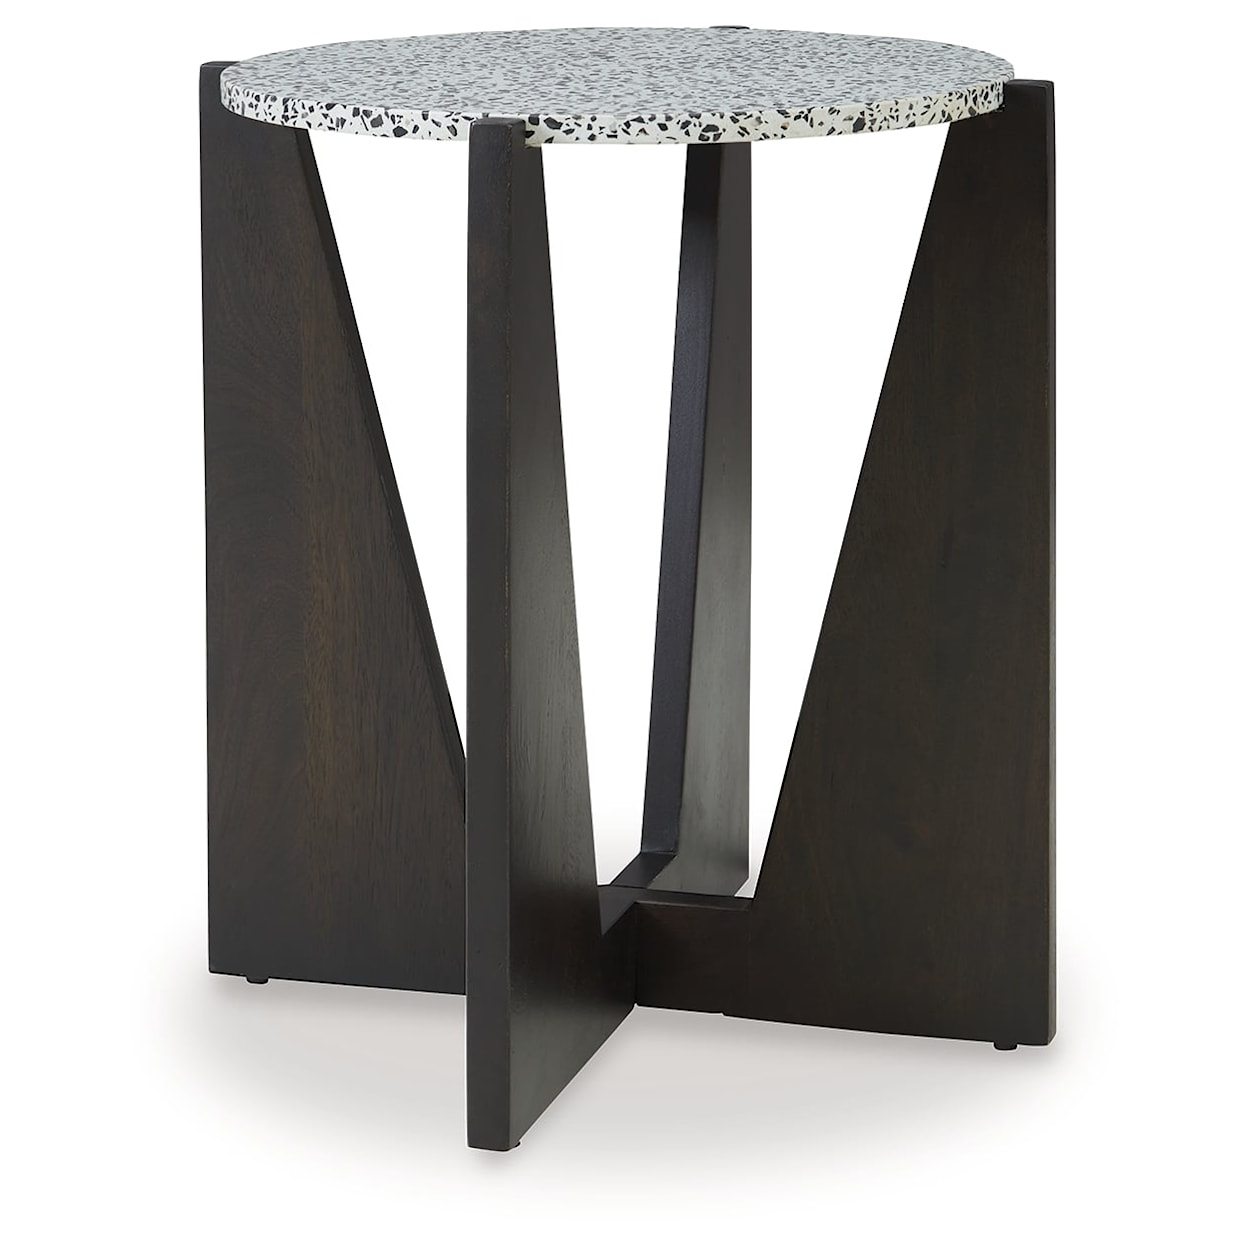 Benchcraft Tellrich Accent Table